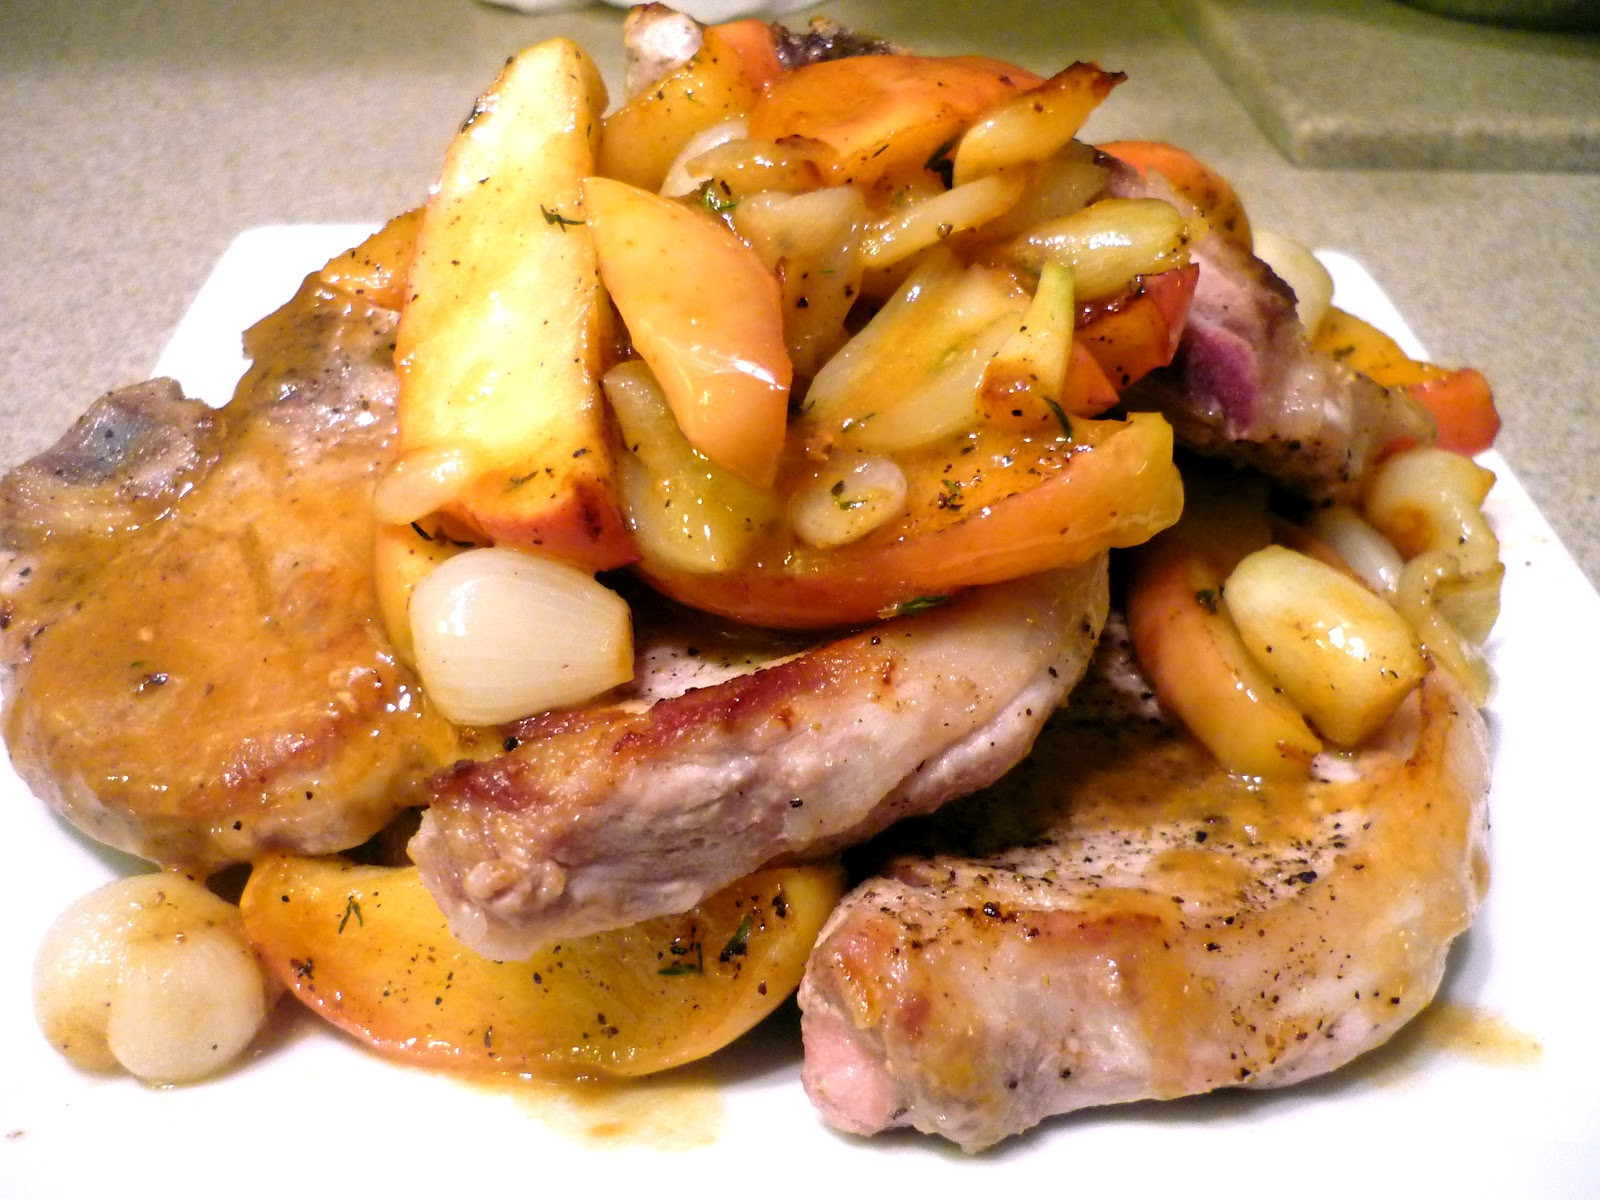 Pressure Cooker Pork Chops
 The No Pressure Cooker Pork Chops with Roasted Apples and